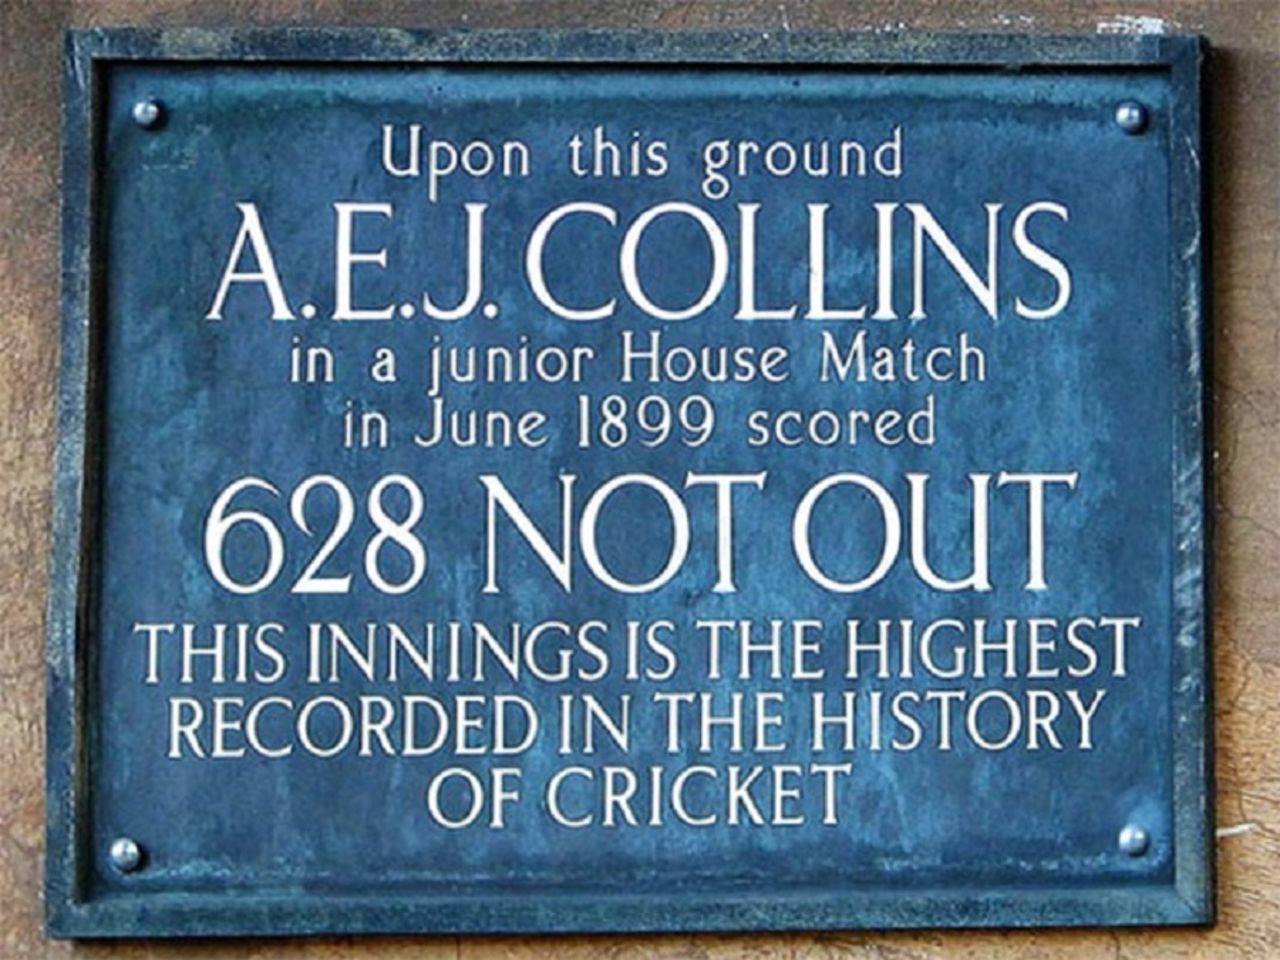 A memorial at Clifton College marking AEJ Collins' record innings